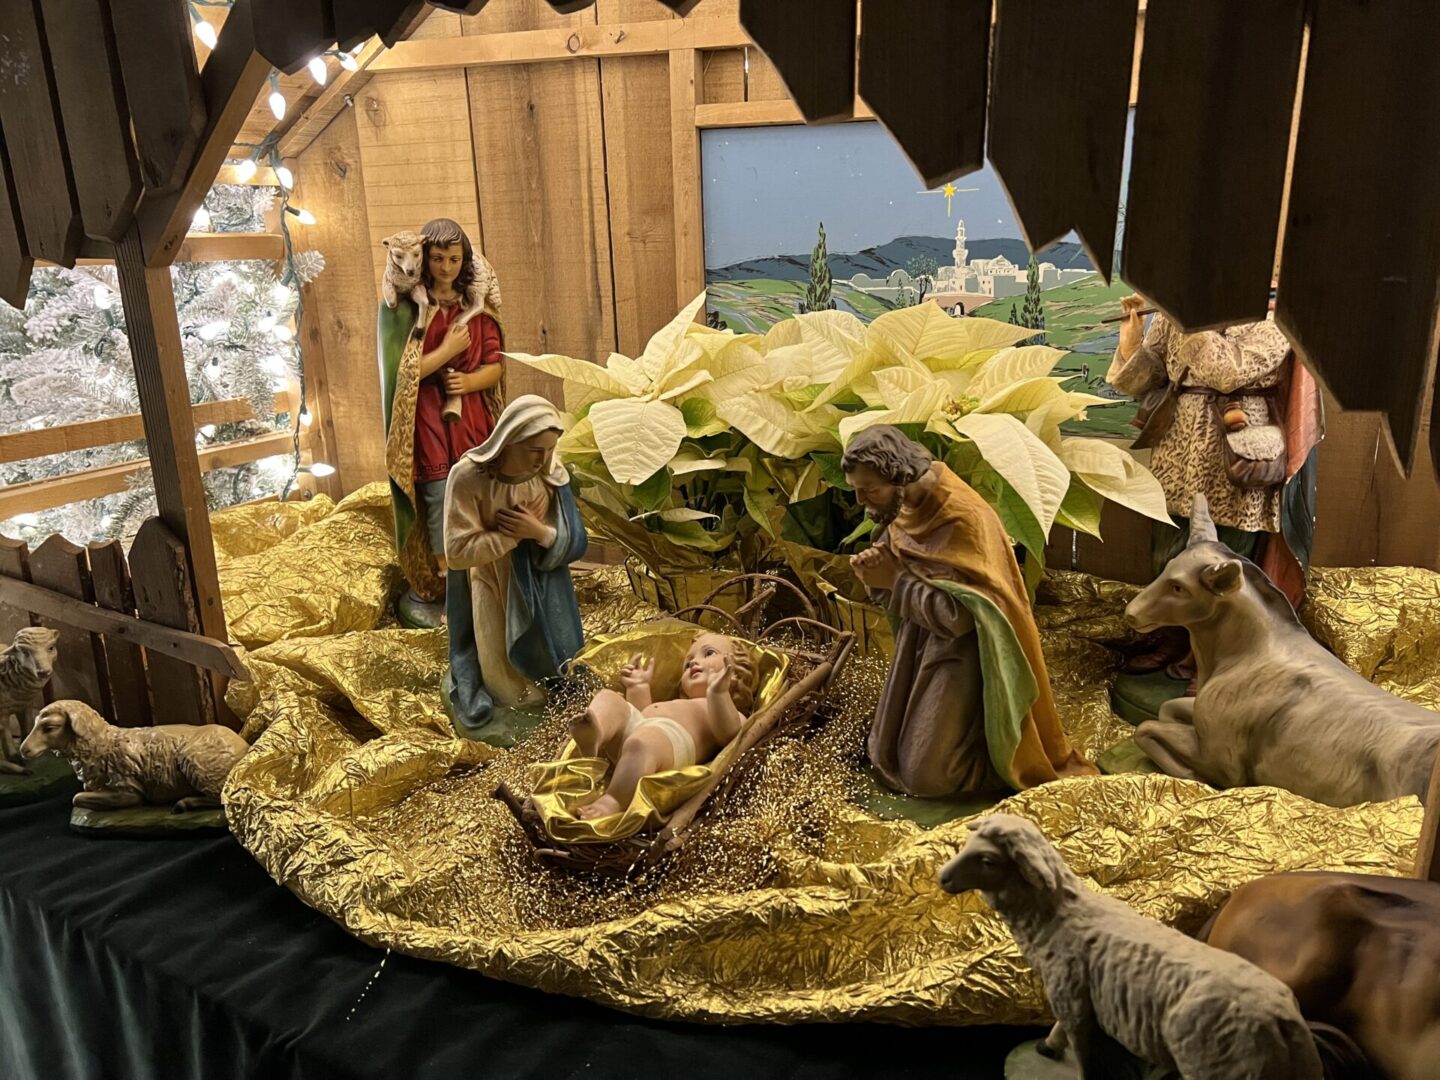 A beautiful display of the holy night with baby Jesus